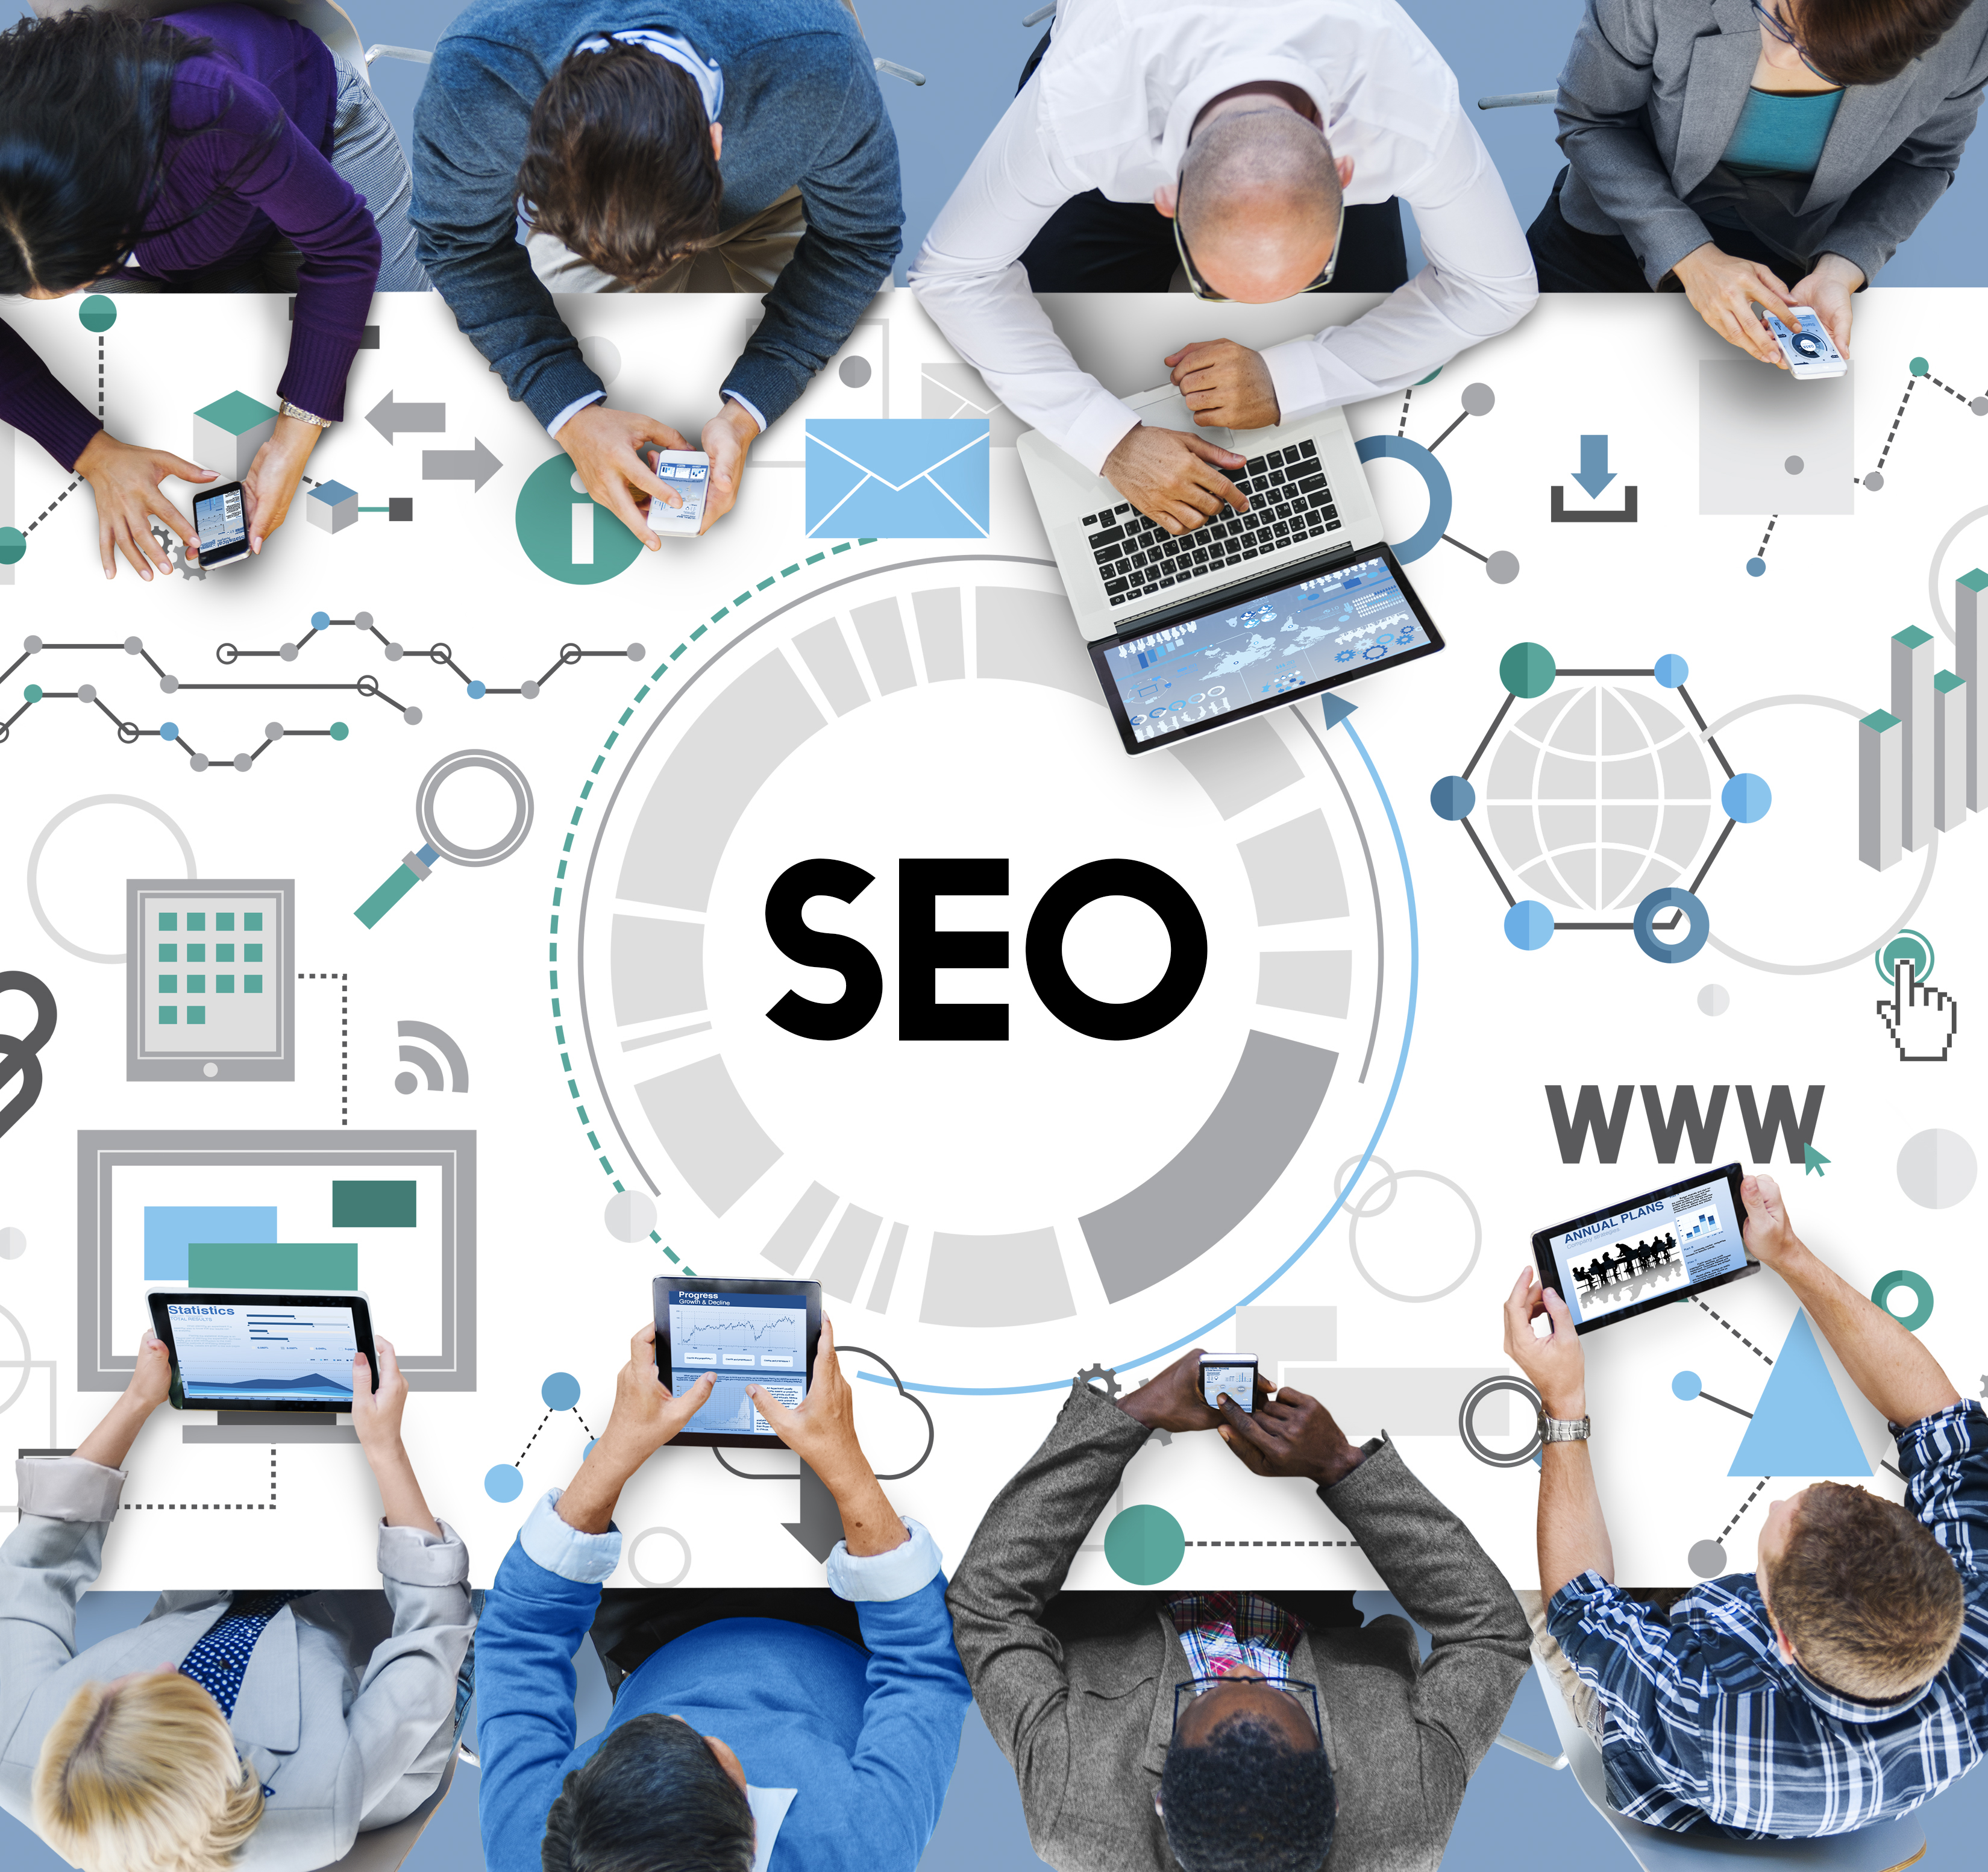 How SEO Helps Small Businesses?